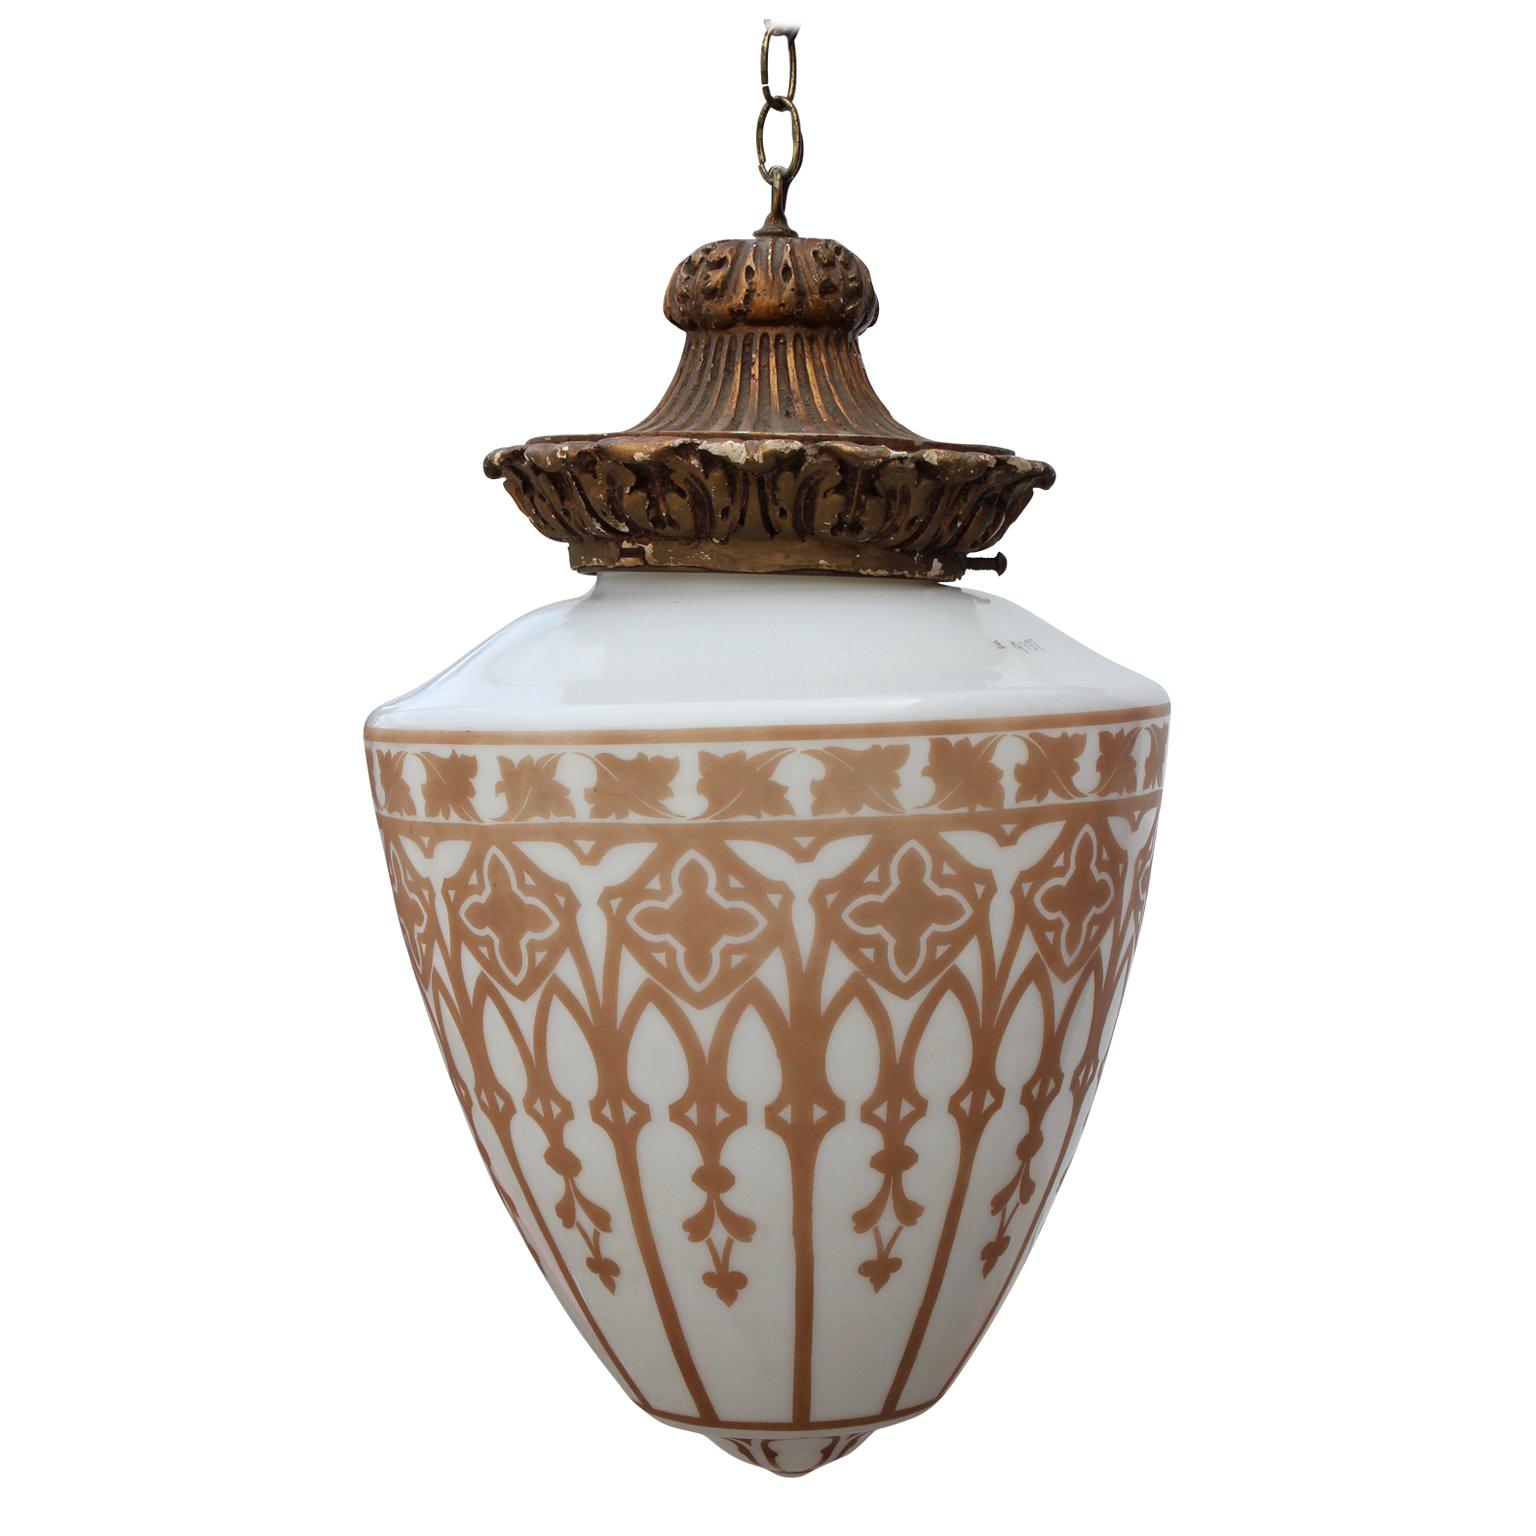 Vintage Pendant Chandelier Light with Gold Leaf Base and Architectural Stencil